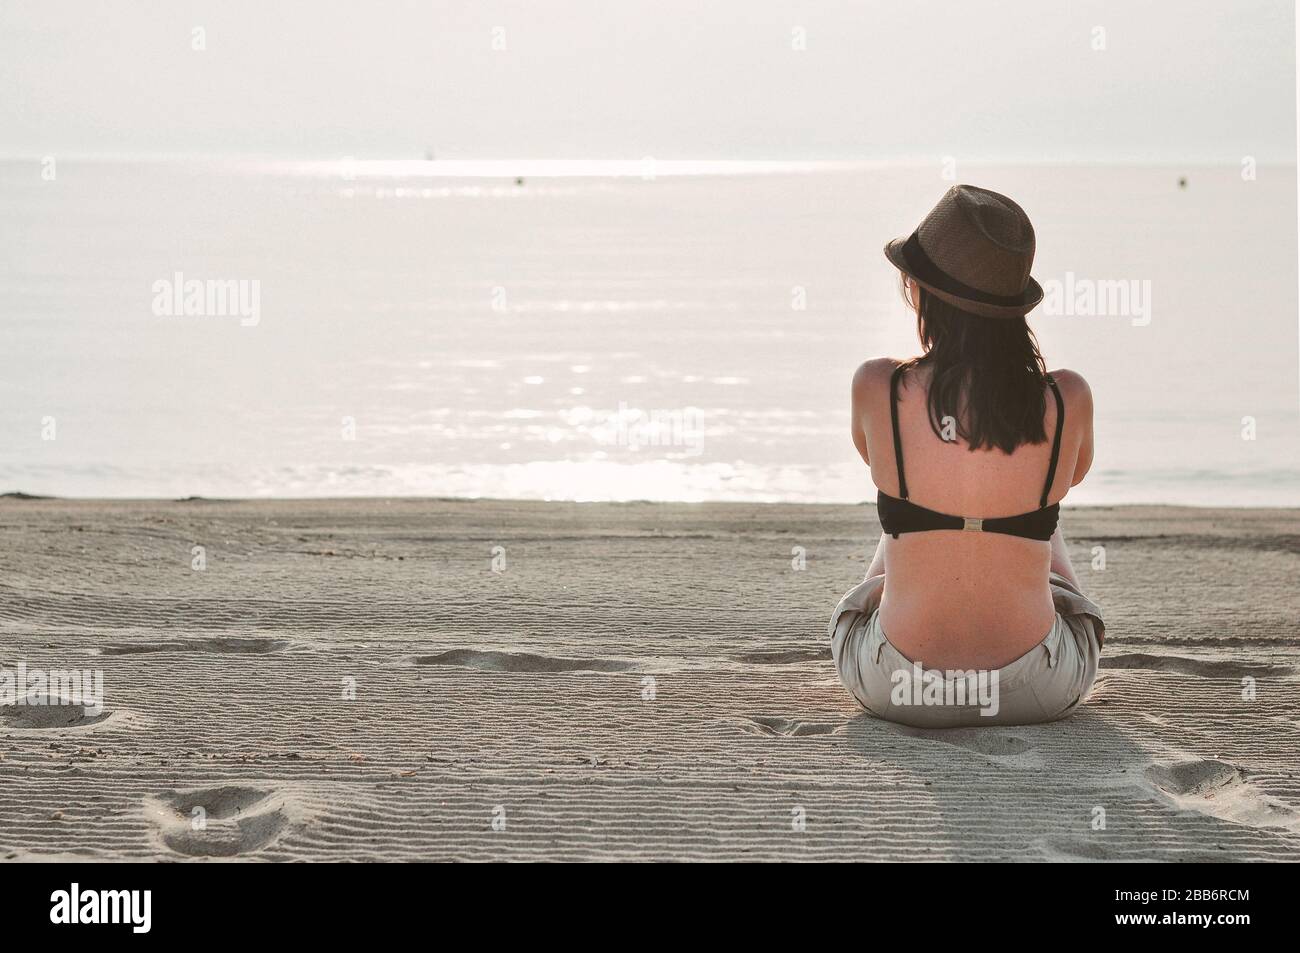 Rear view of a woman sitting on beach looking out to sea, Majorca, Balearics, Spain Stock Photo